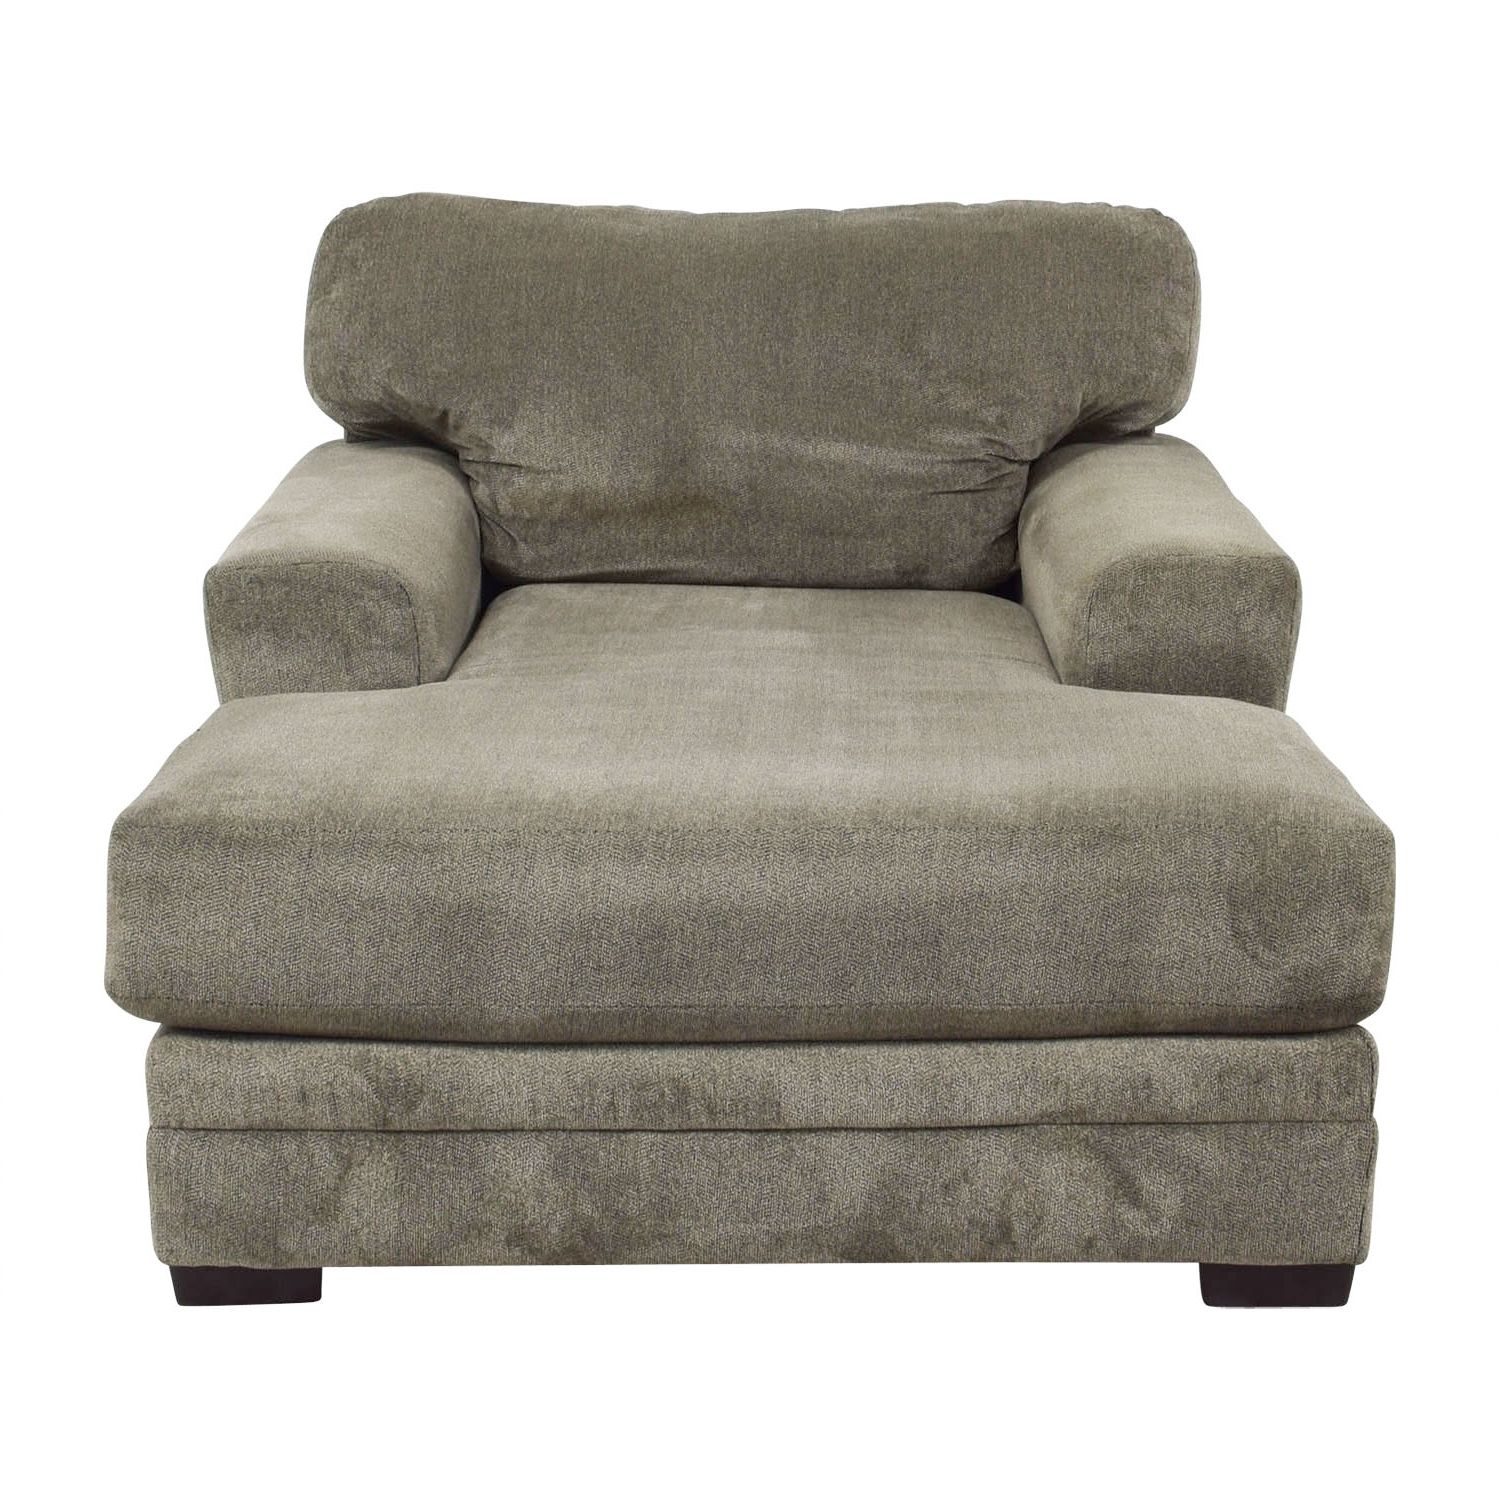 [%81% Off – Bob's Furniture Bob's Furniture Grey Chaise Lounge / Sofas Regarding Most Up To Date Bobs Furniture Chaises|bobs Furniture Chaises In Most Recently Released 81% Off – Bob's Furniture Bob's Furniture Grey Chaise Lounge / Sofas|latest Bobs Furniture Chaises For 81% Off – Bob's Furniture Bob's Furniture Grey Chaise Lounge / Sofas|widely Used 81% Off – Bob's Furniture Bob's Furniture Grey Chaise Lounge / Sofas With Regard To Bobs Furniture Chaises%] (View 7 of 15)